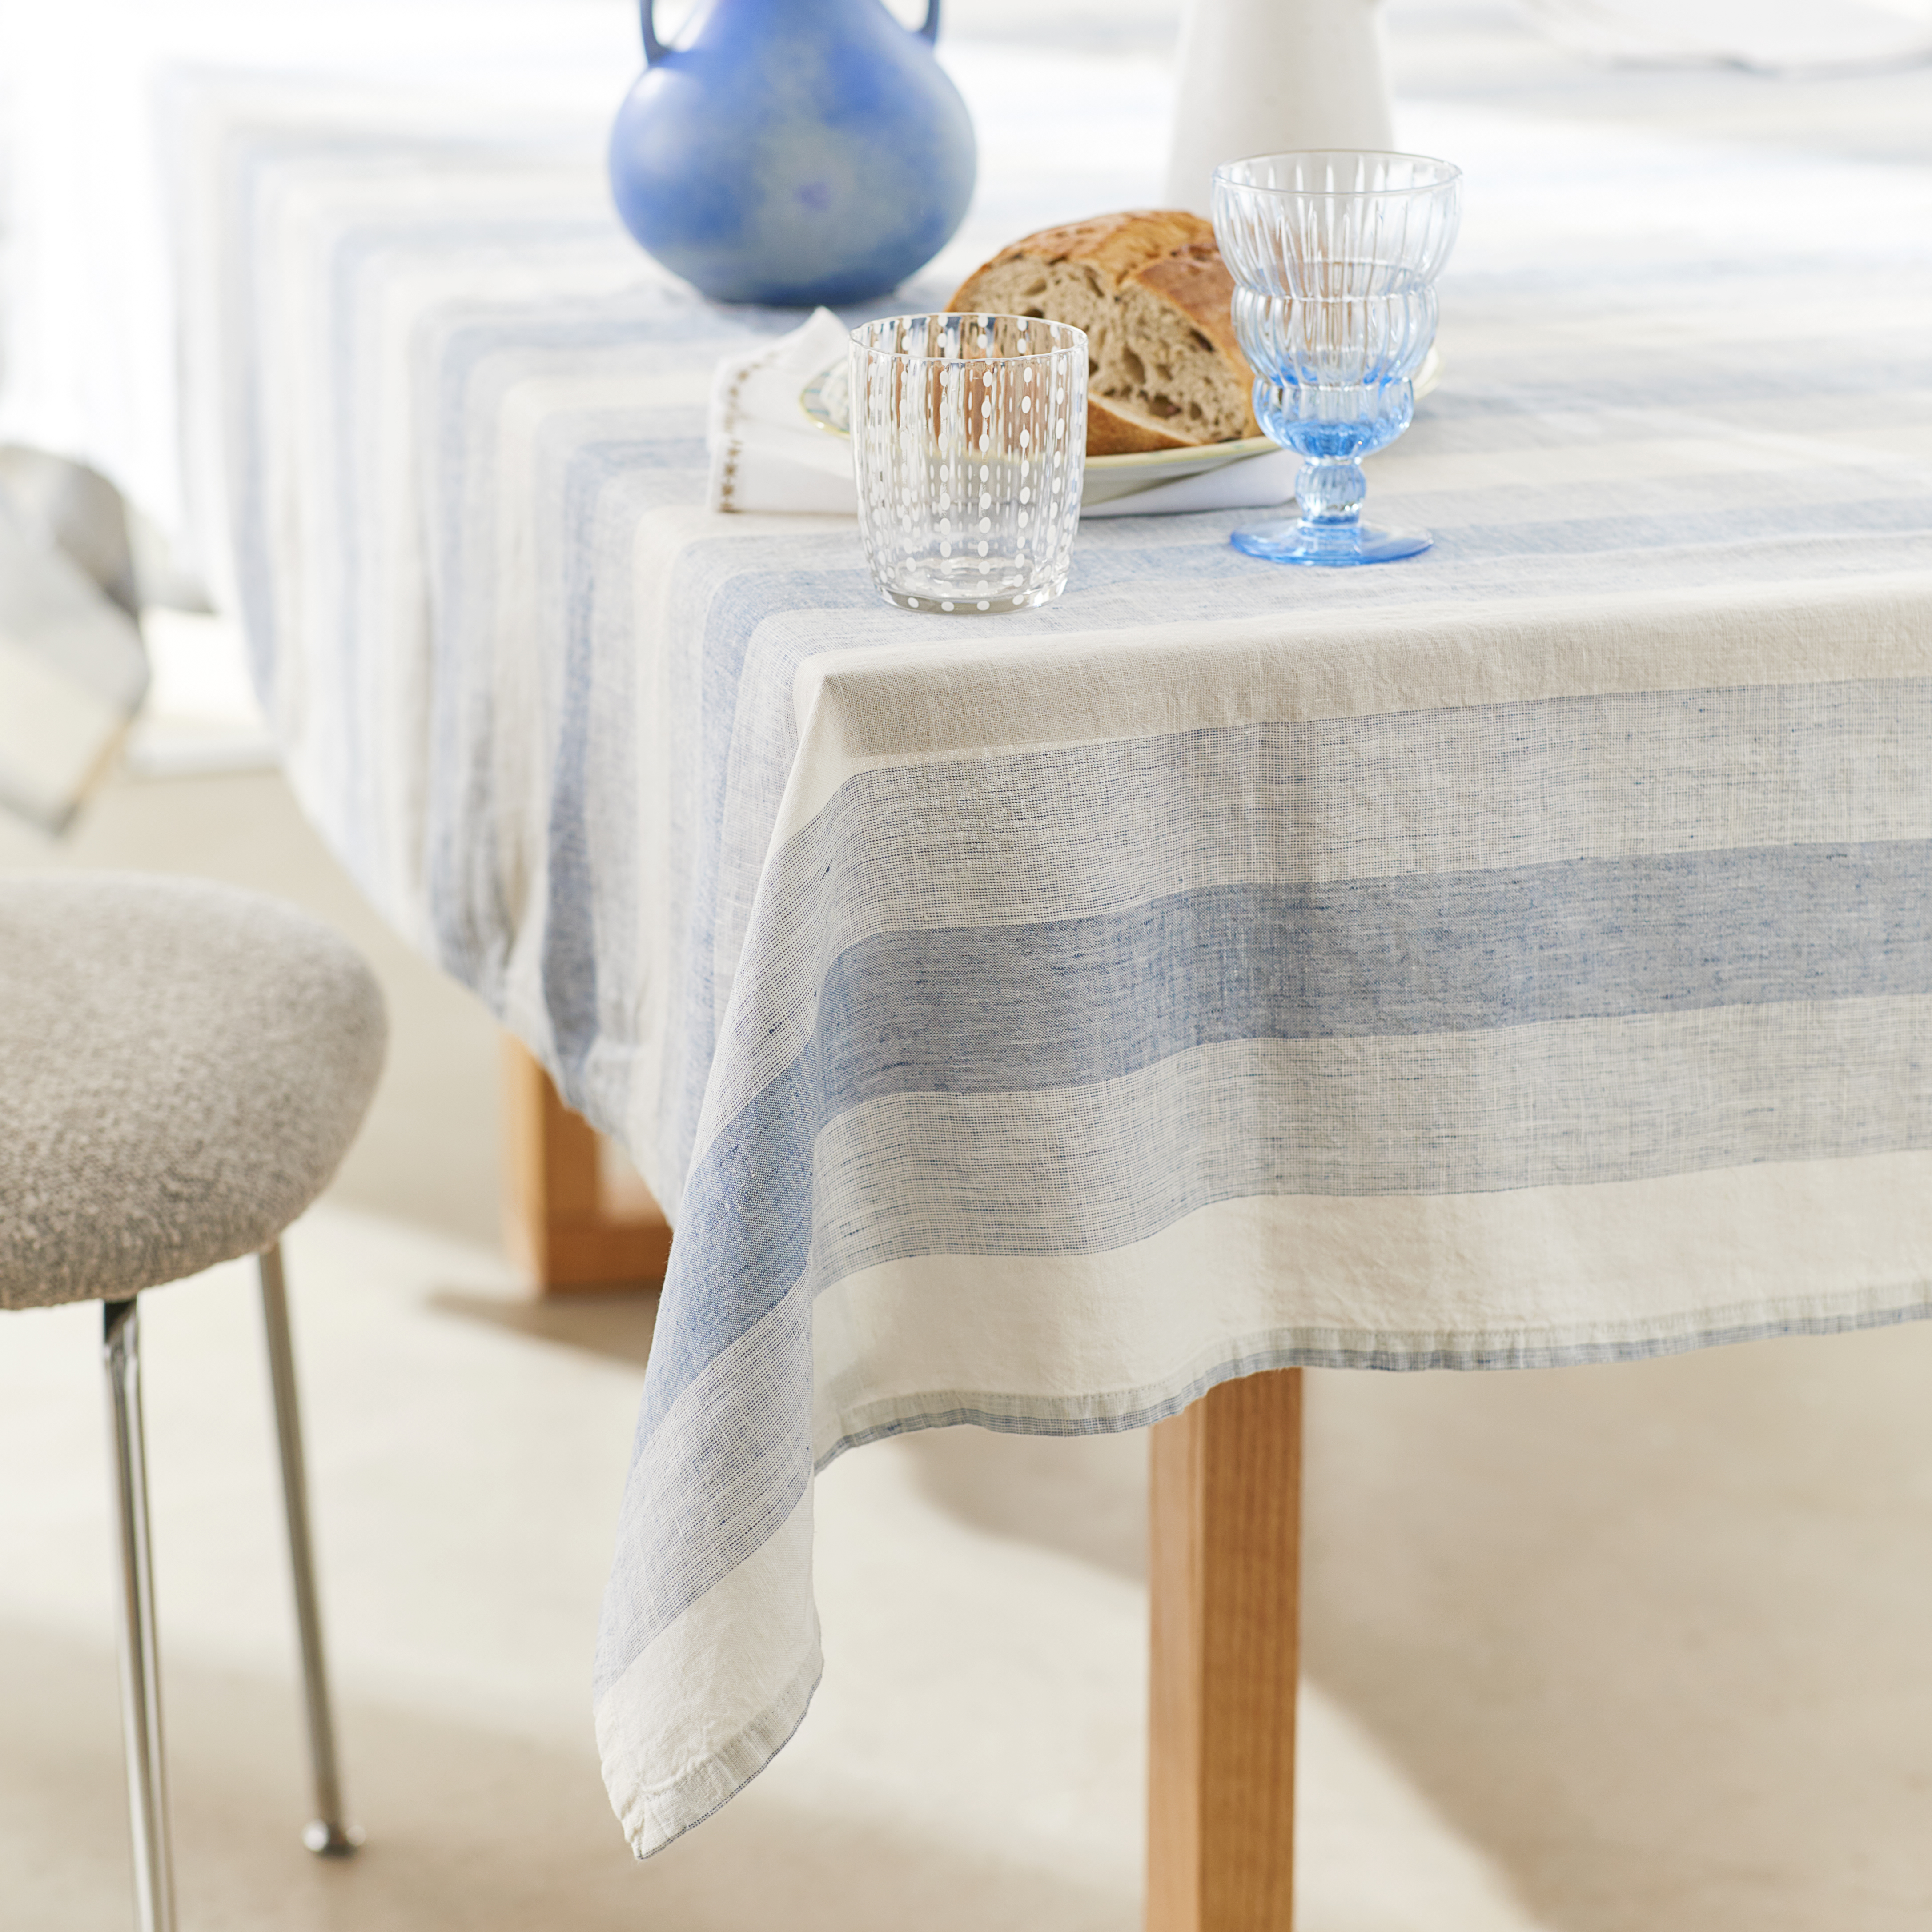 https://www.adairs.com.au/globalassets/13.-ecommerce/03.-product-images/2022_images/homewares/tablecloths-runners--placemats/54241-summer-stripe-table-cloth-blue---styled-shot.jpg